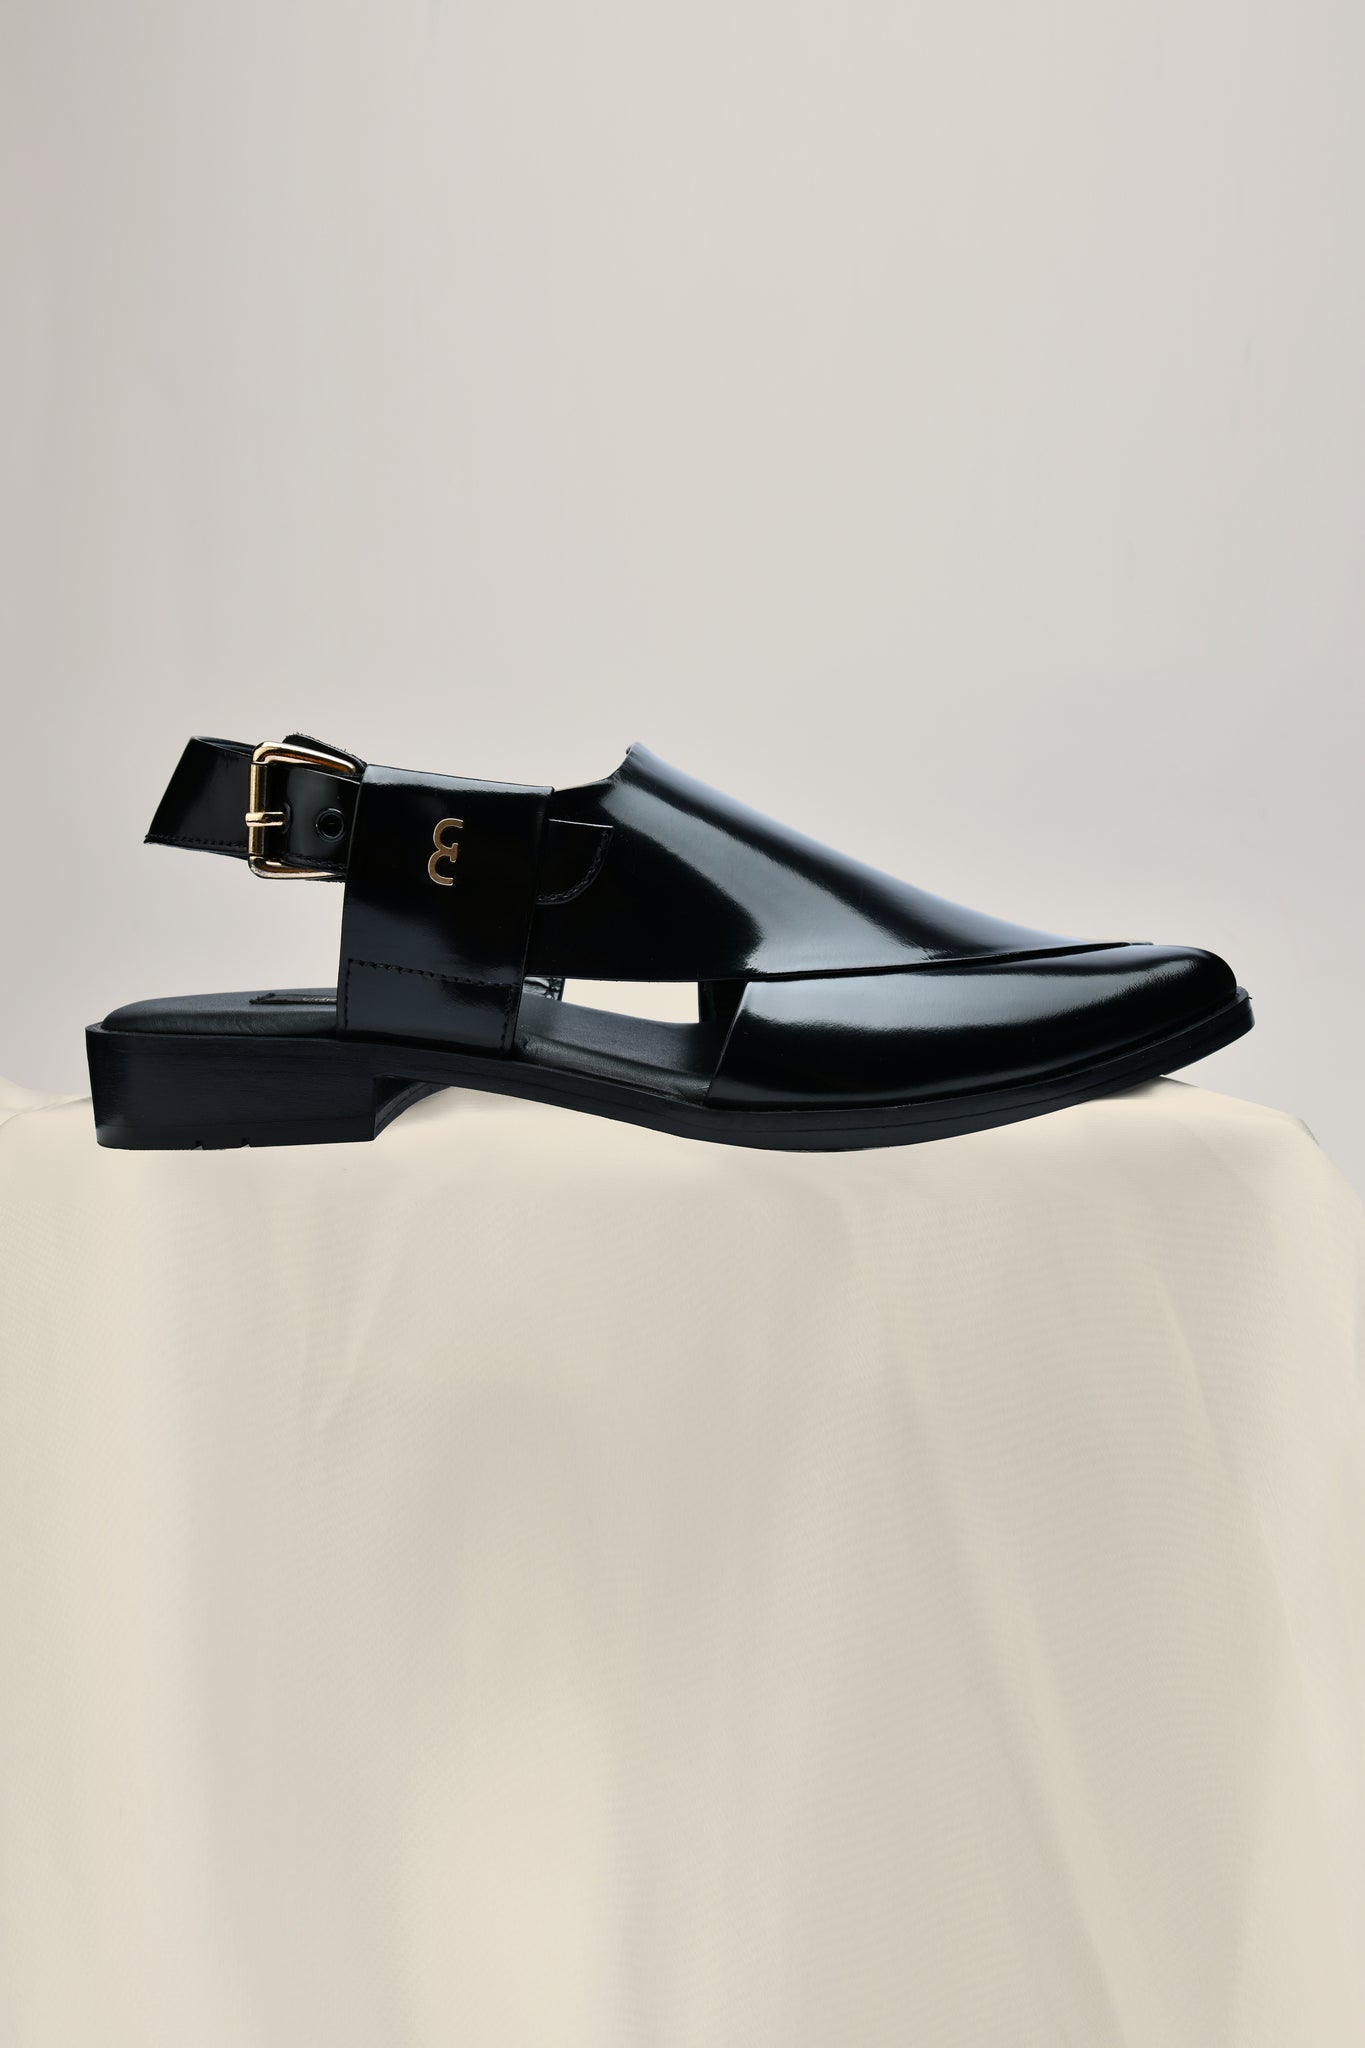 KNIGHTS - Black Leather Sandals